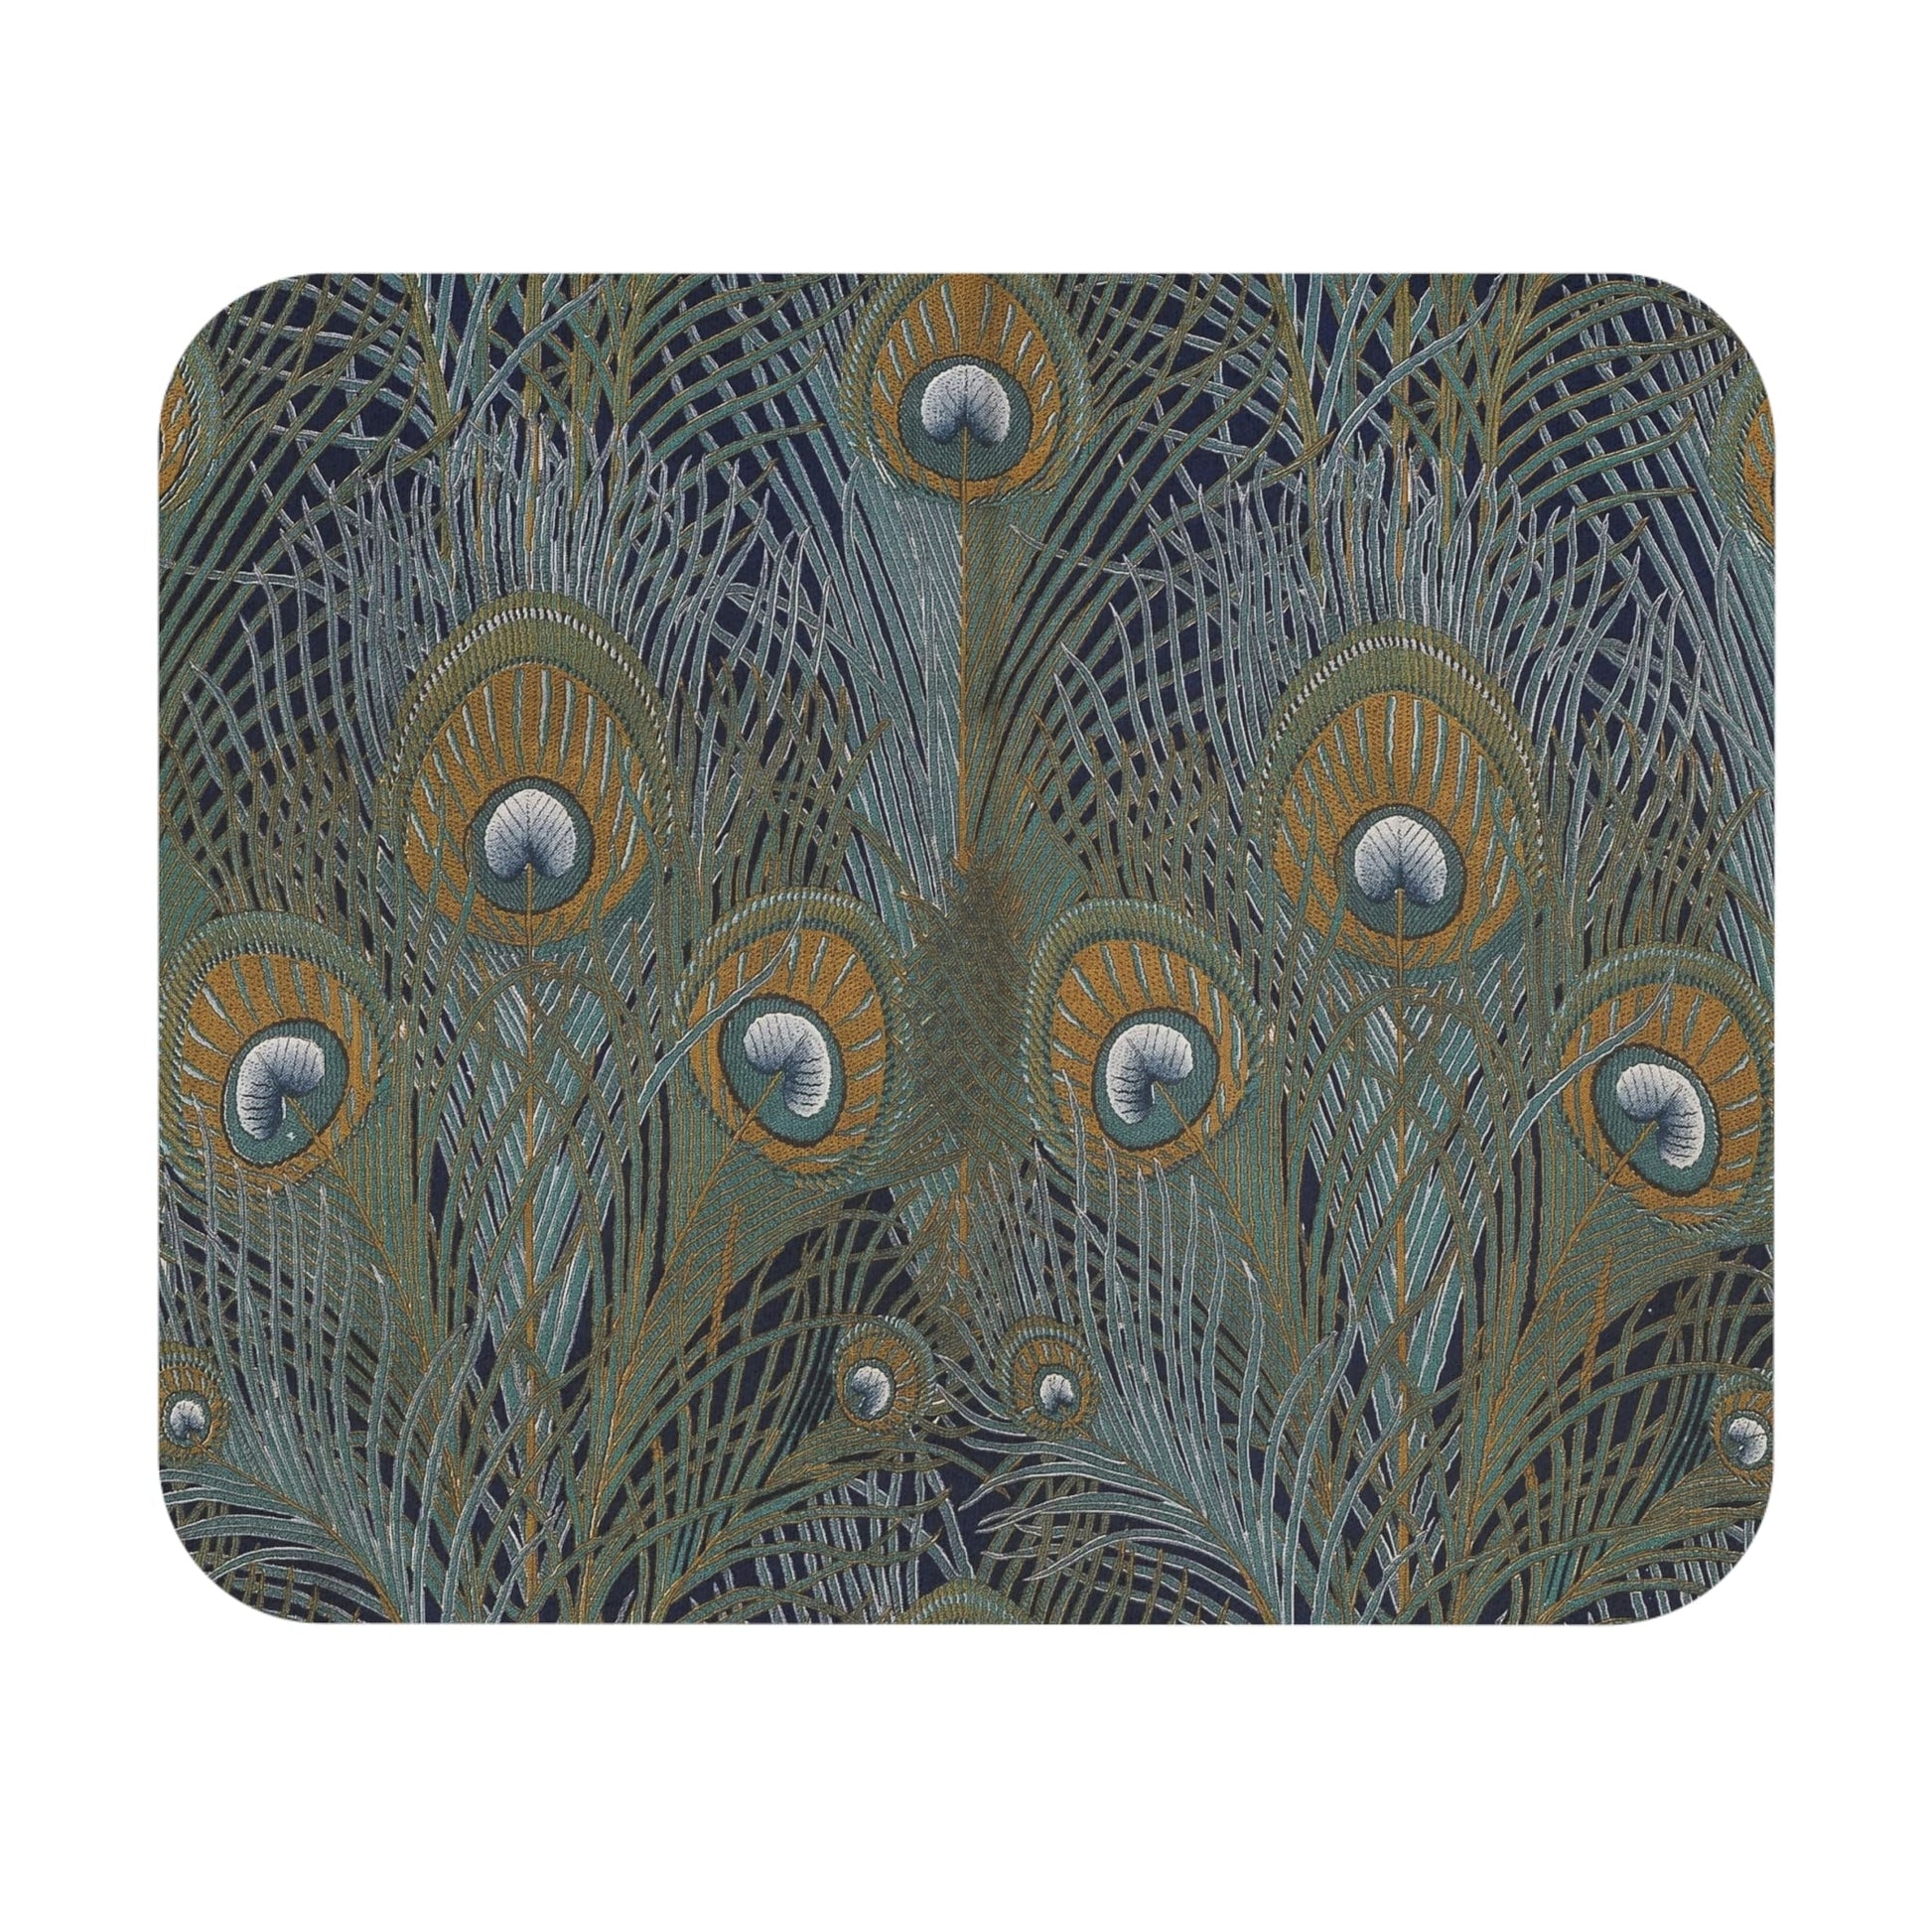 Boho Aesthetic Mouse Pad with peacock feathers art, desk and office decor featuring vibrant boho designs.